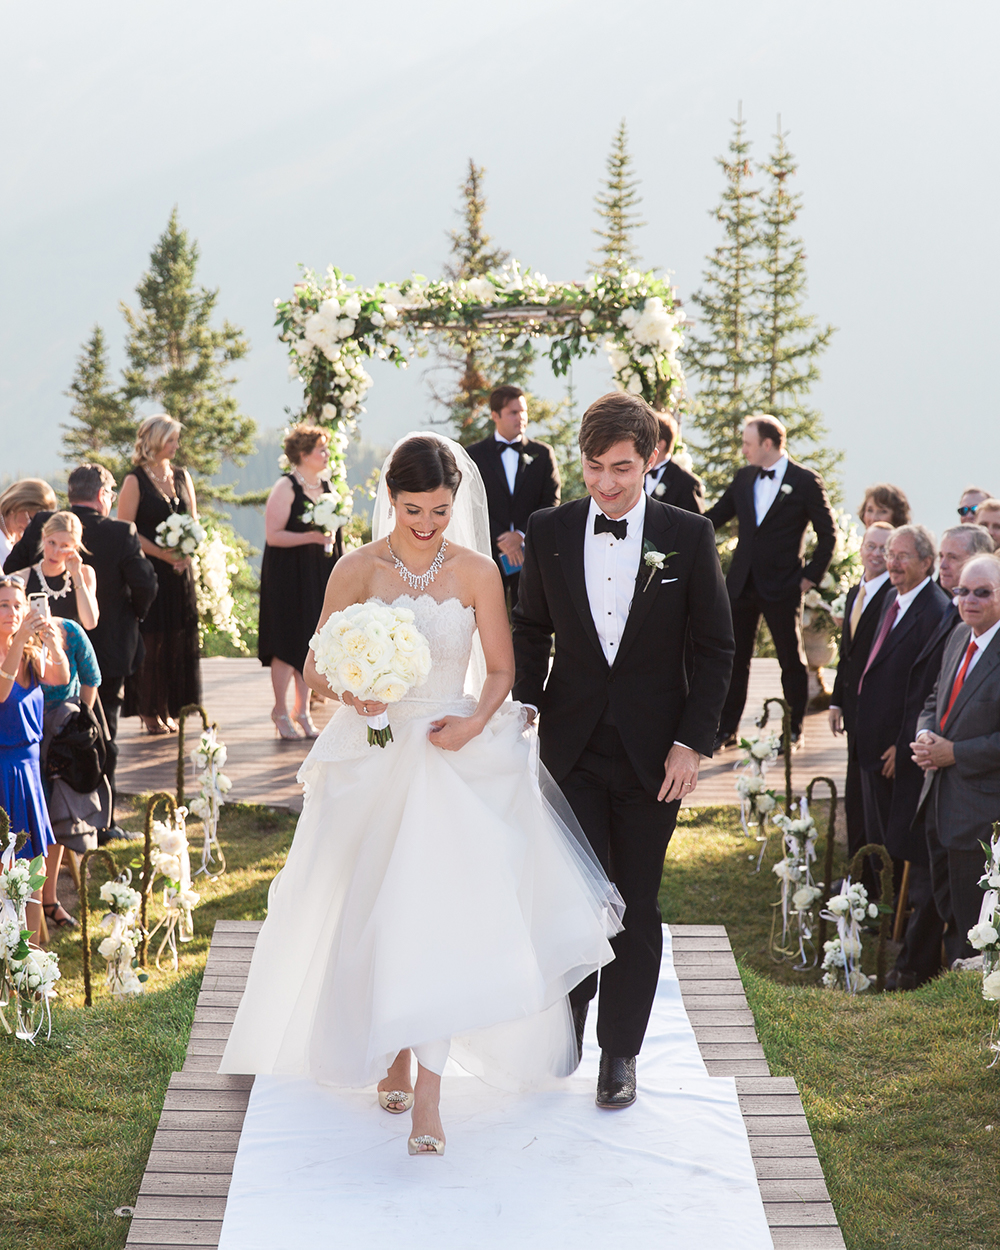 Five Years Since Allison and Mark Said ‘I Do’ Atop Aspen Mountain